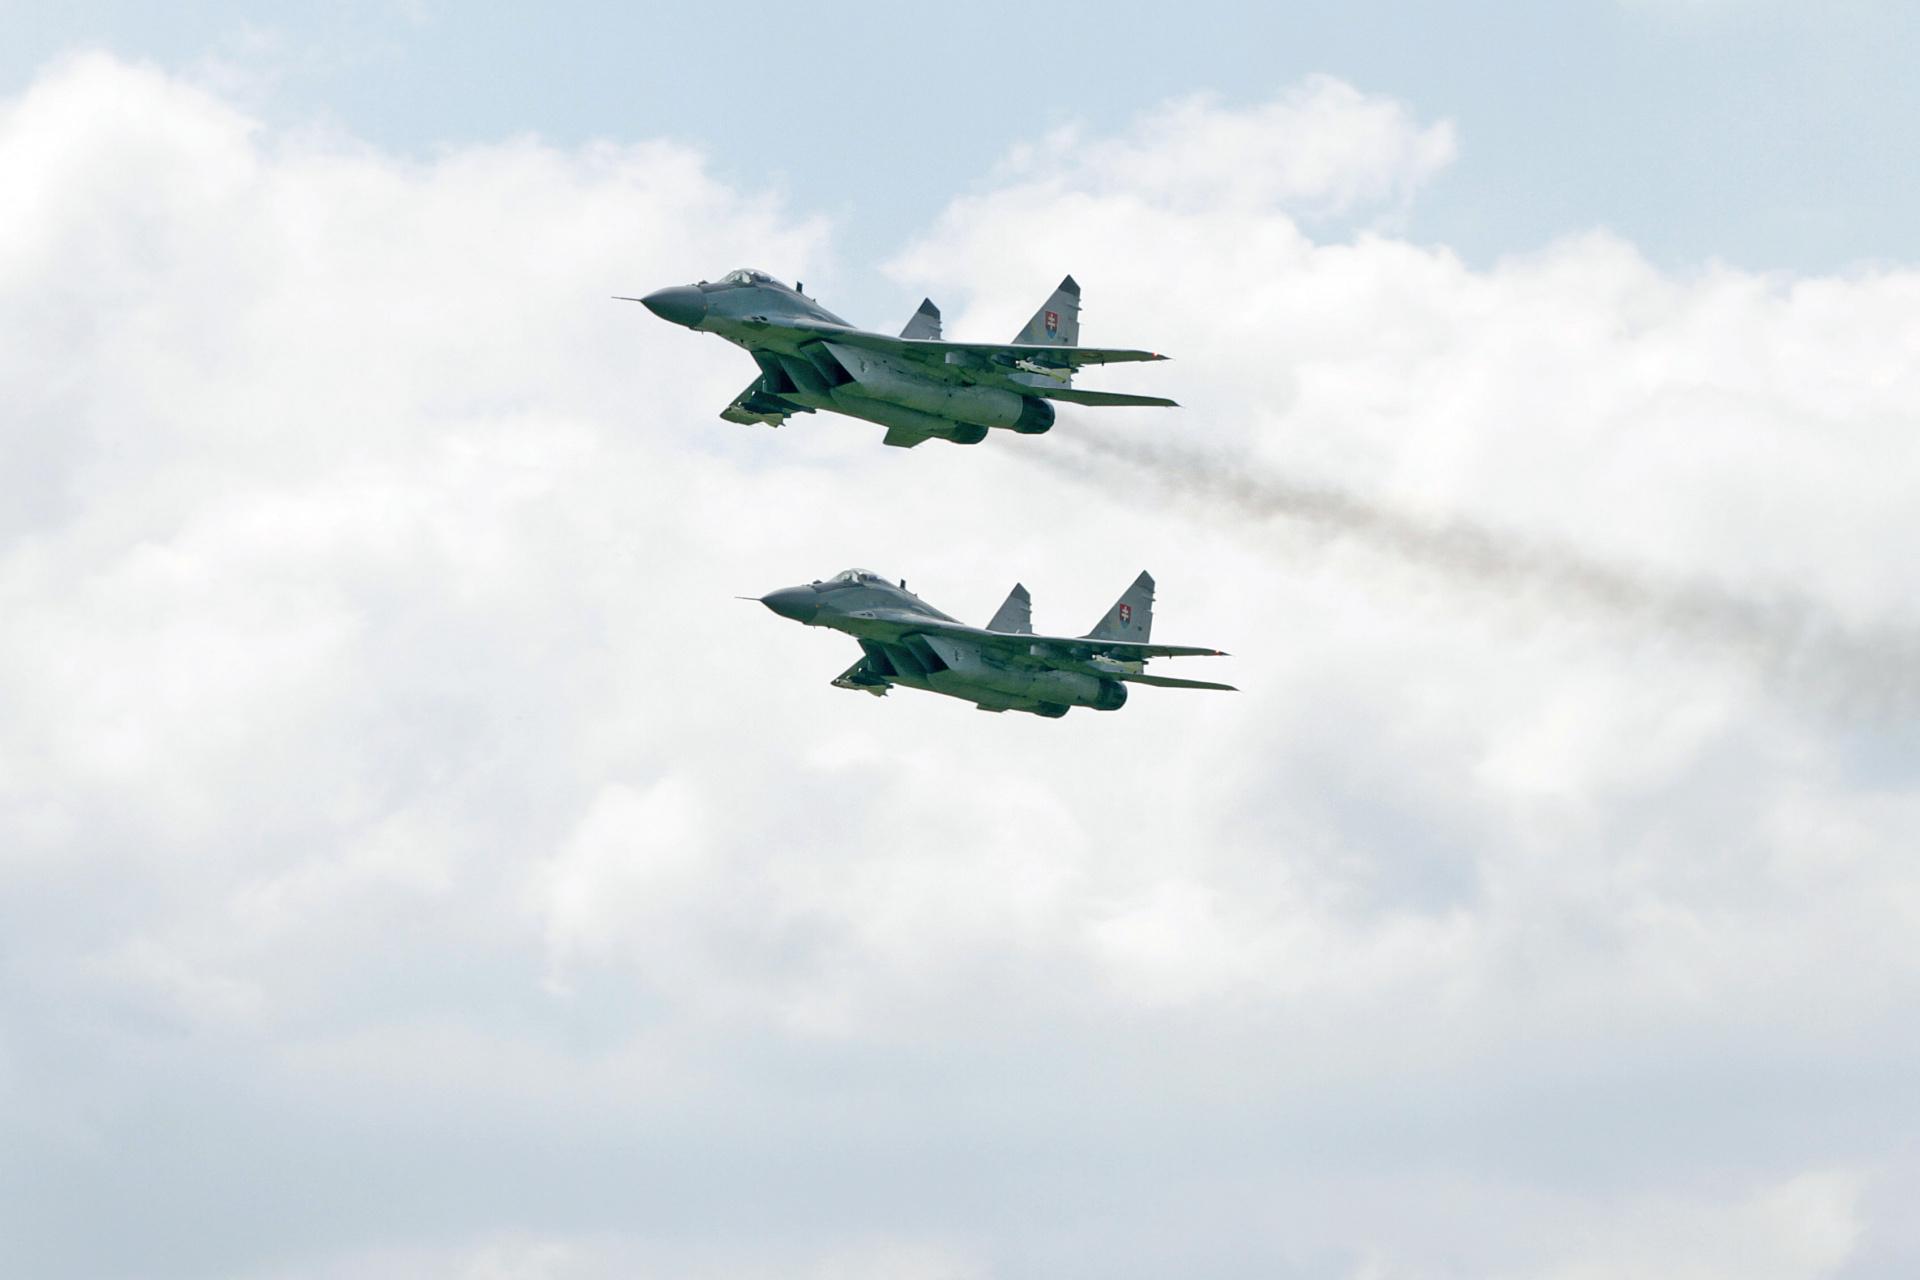 Slovakia completed the transfer of 13 MiG-29 fighters to Ukraine